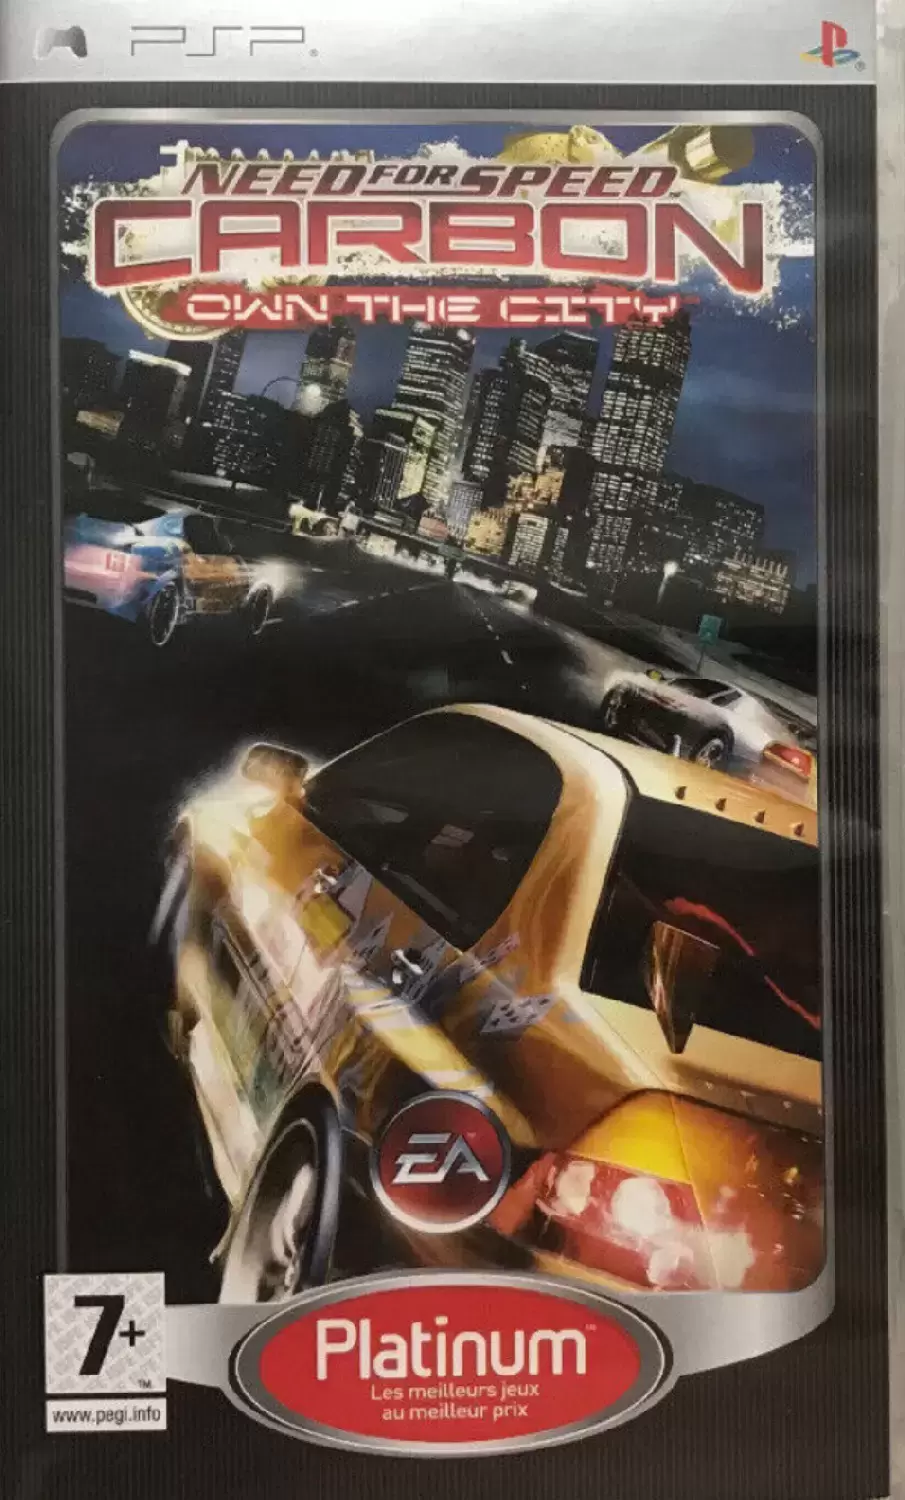 Jeux PSP - Need For Speed Carbon Own The City - Platinium